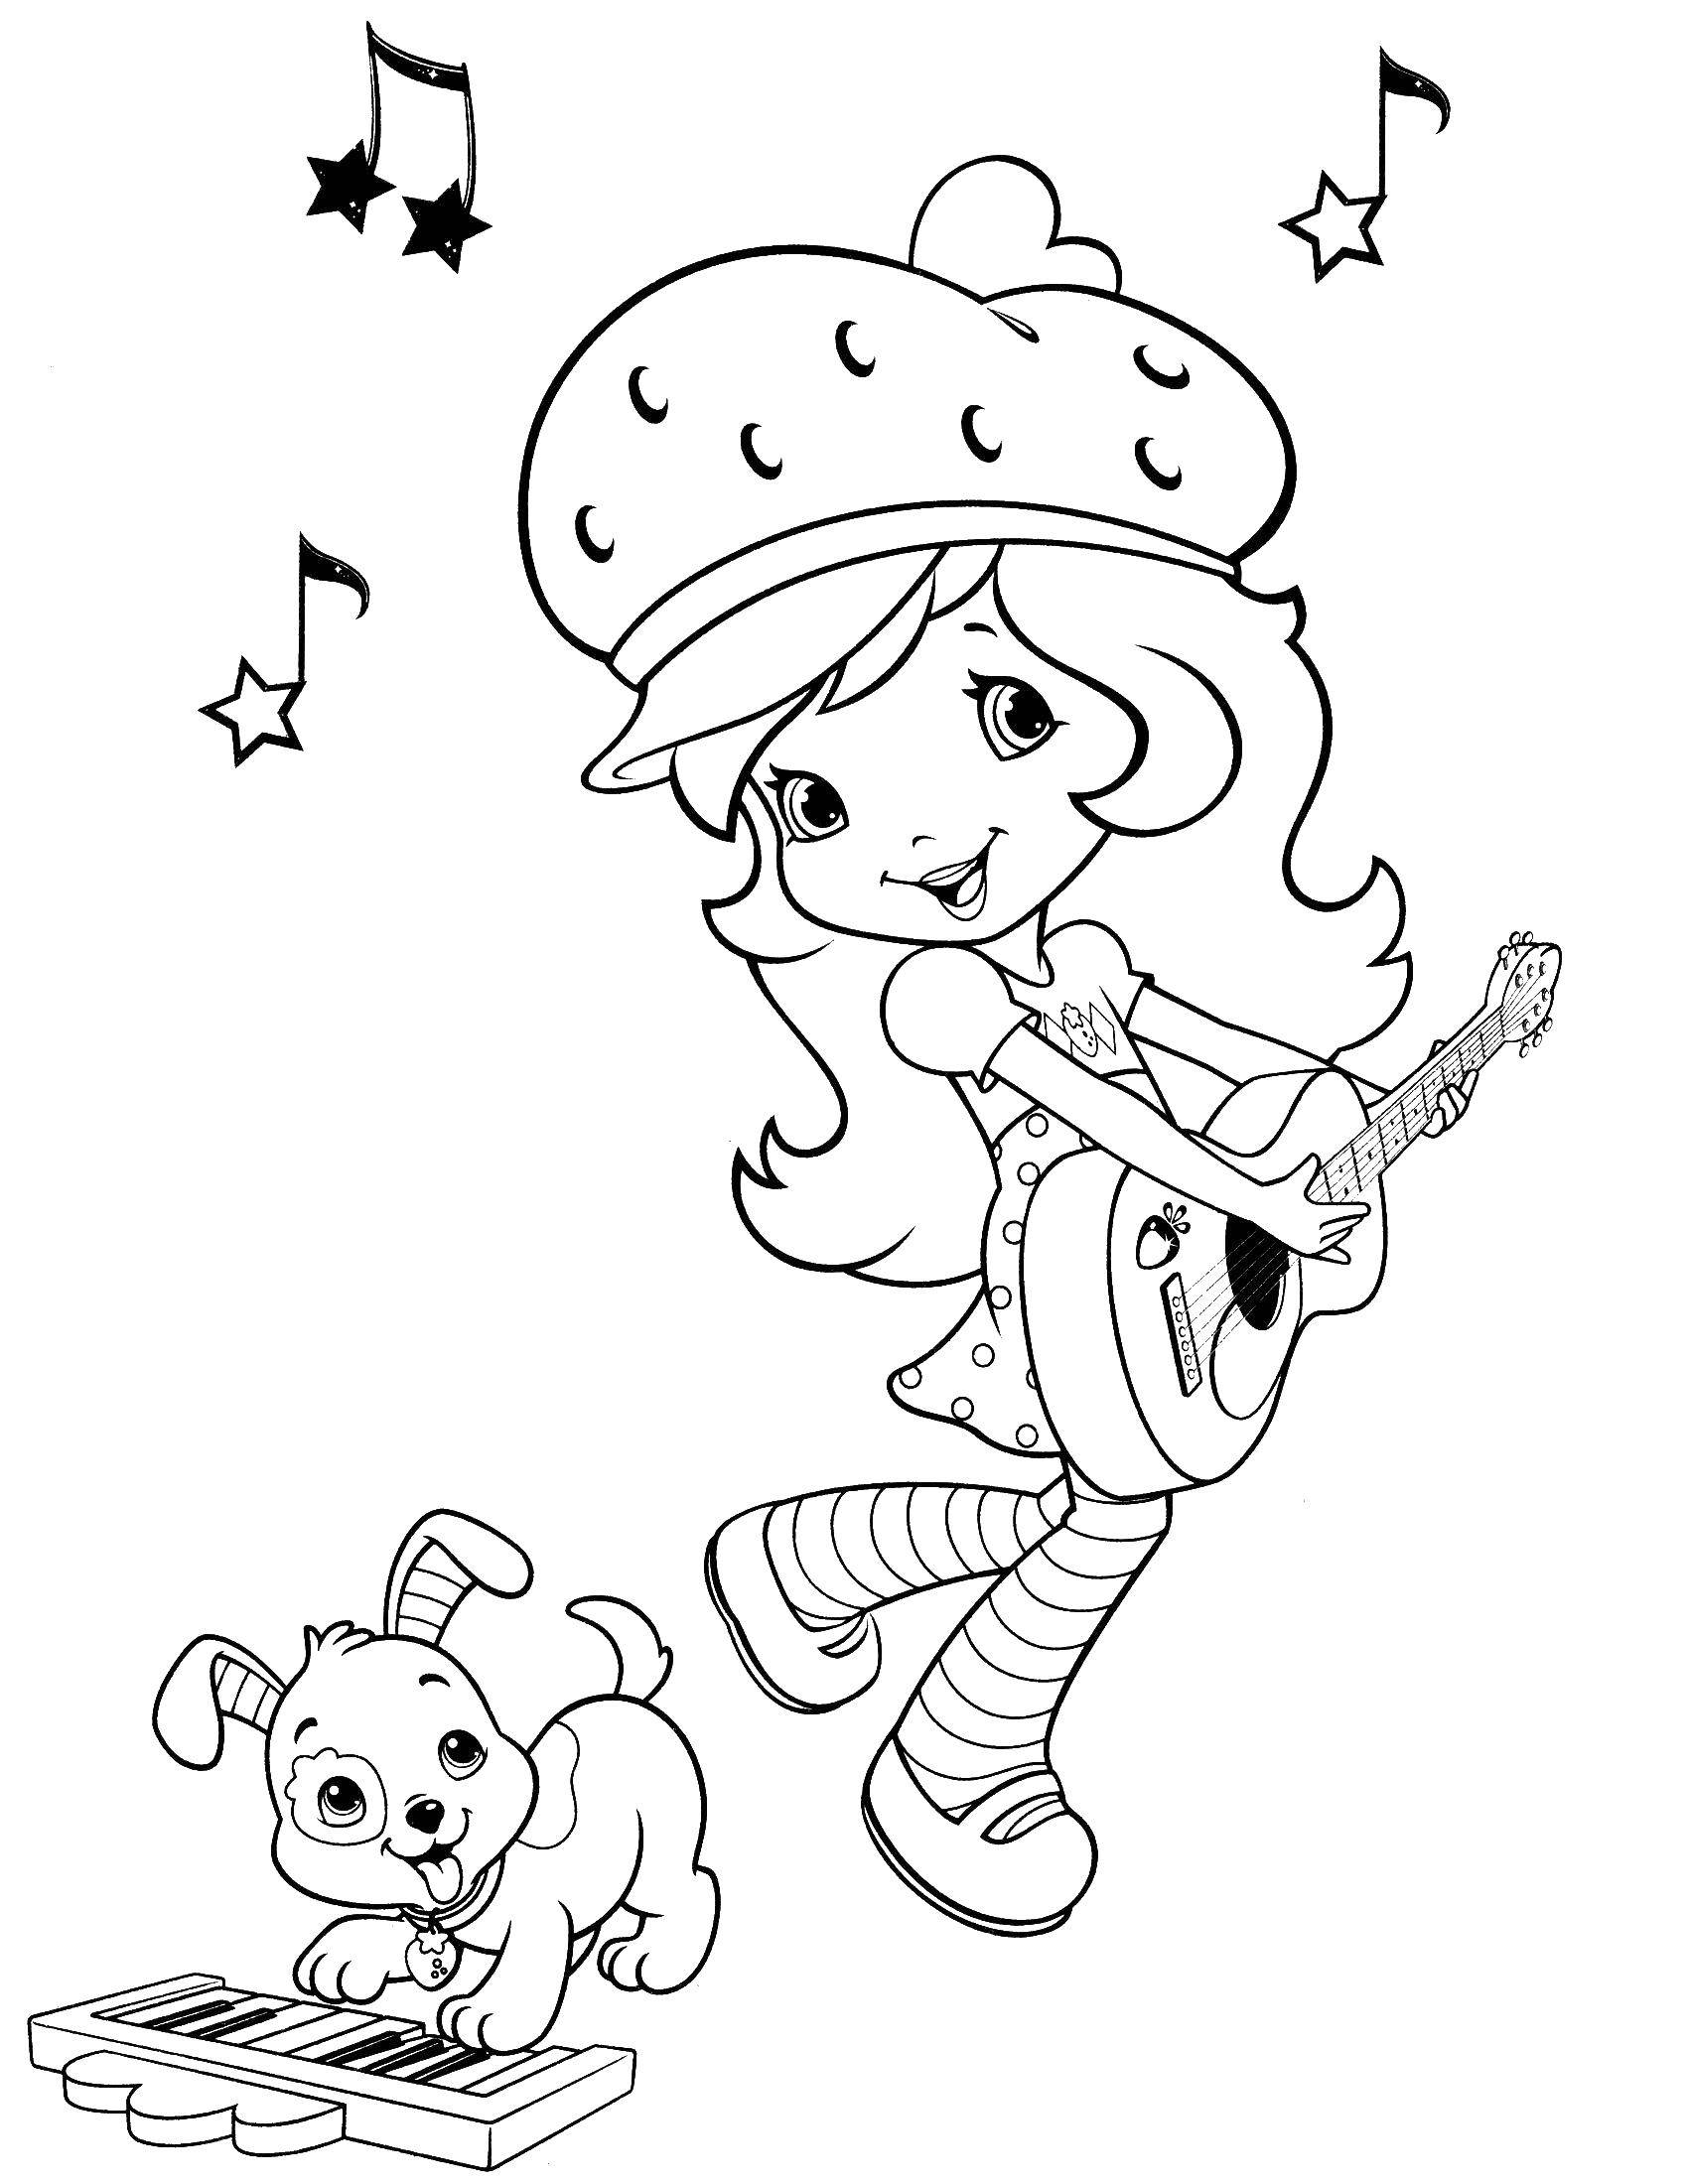 Coloring Charlotte strawberry plays the guitar. Category Charlotte zemlyanichka cartoons. Tags:  Charlotte, a strawberry, cartoons.